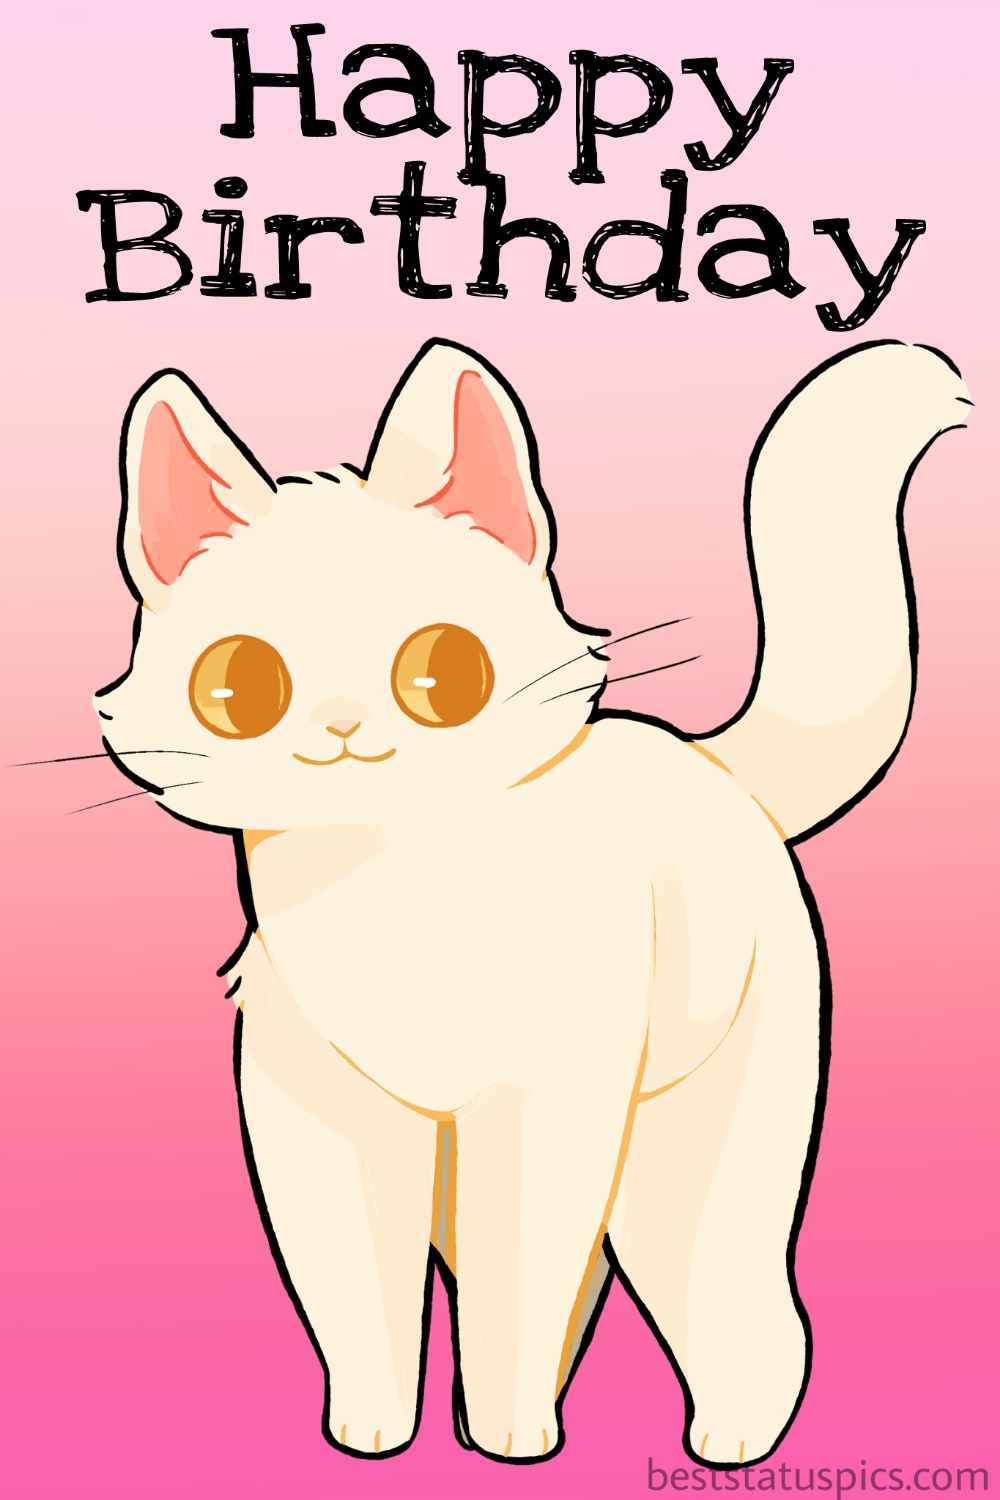 Cute happy birthday images with cat for girl, her, girlfriend, sister, daughter